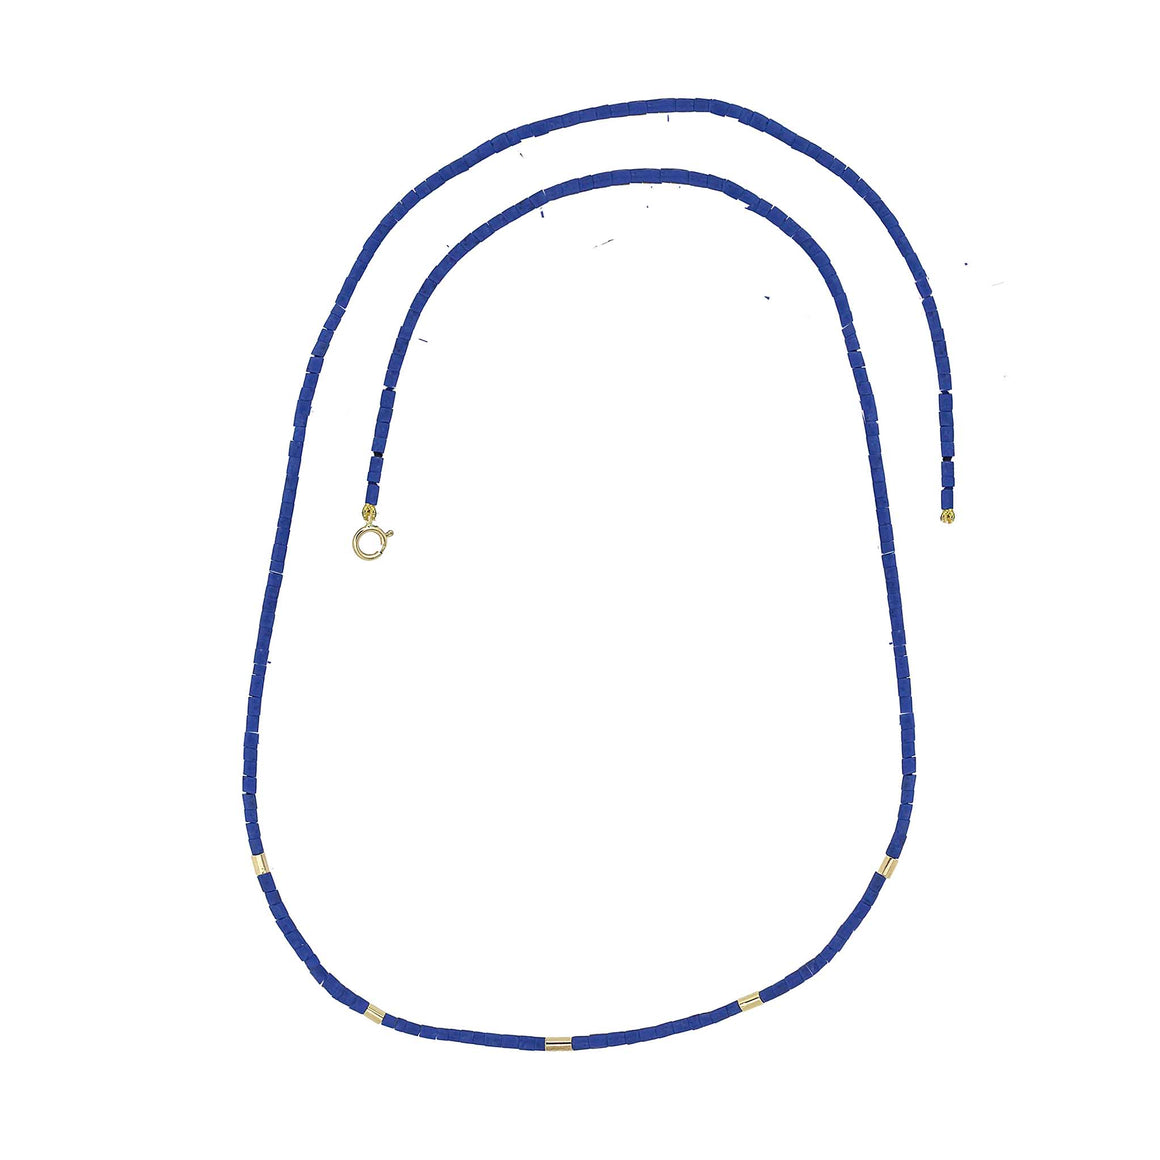 Strong blue Lapis beads with gold tube accents